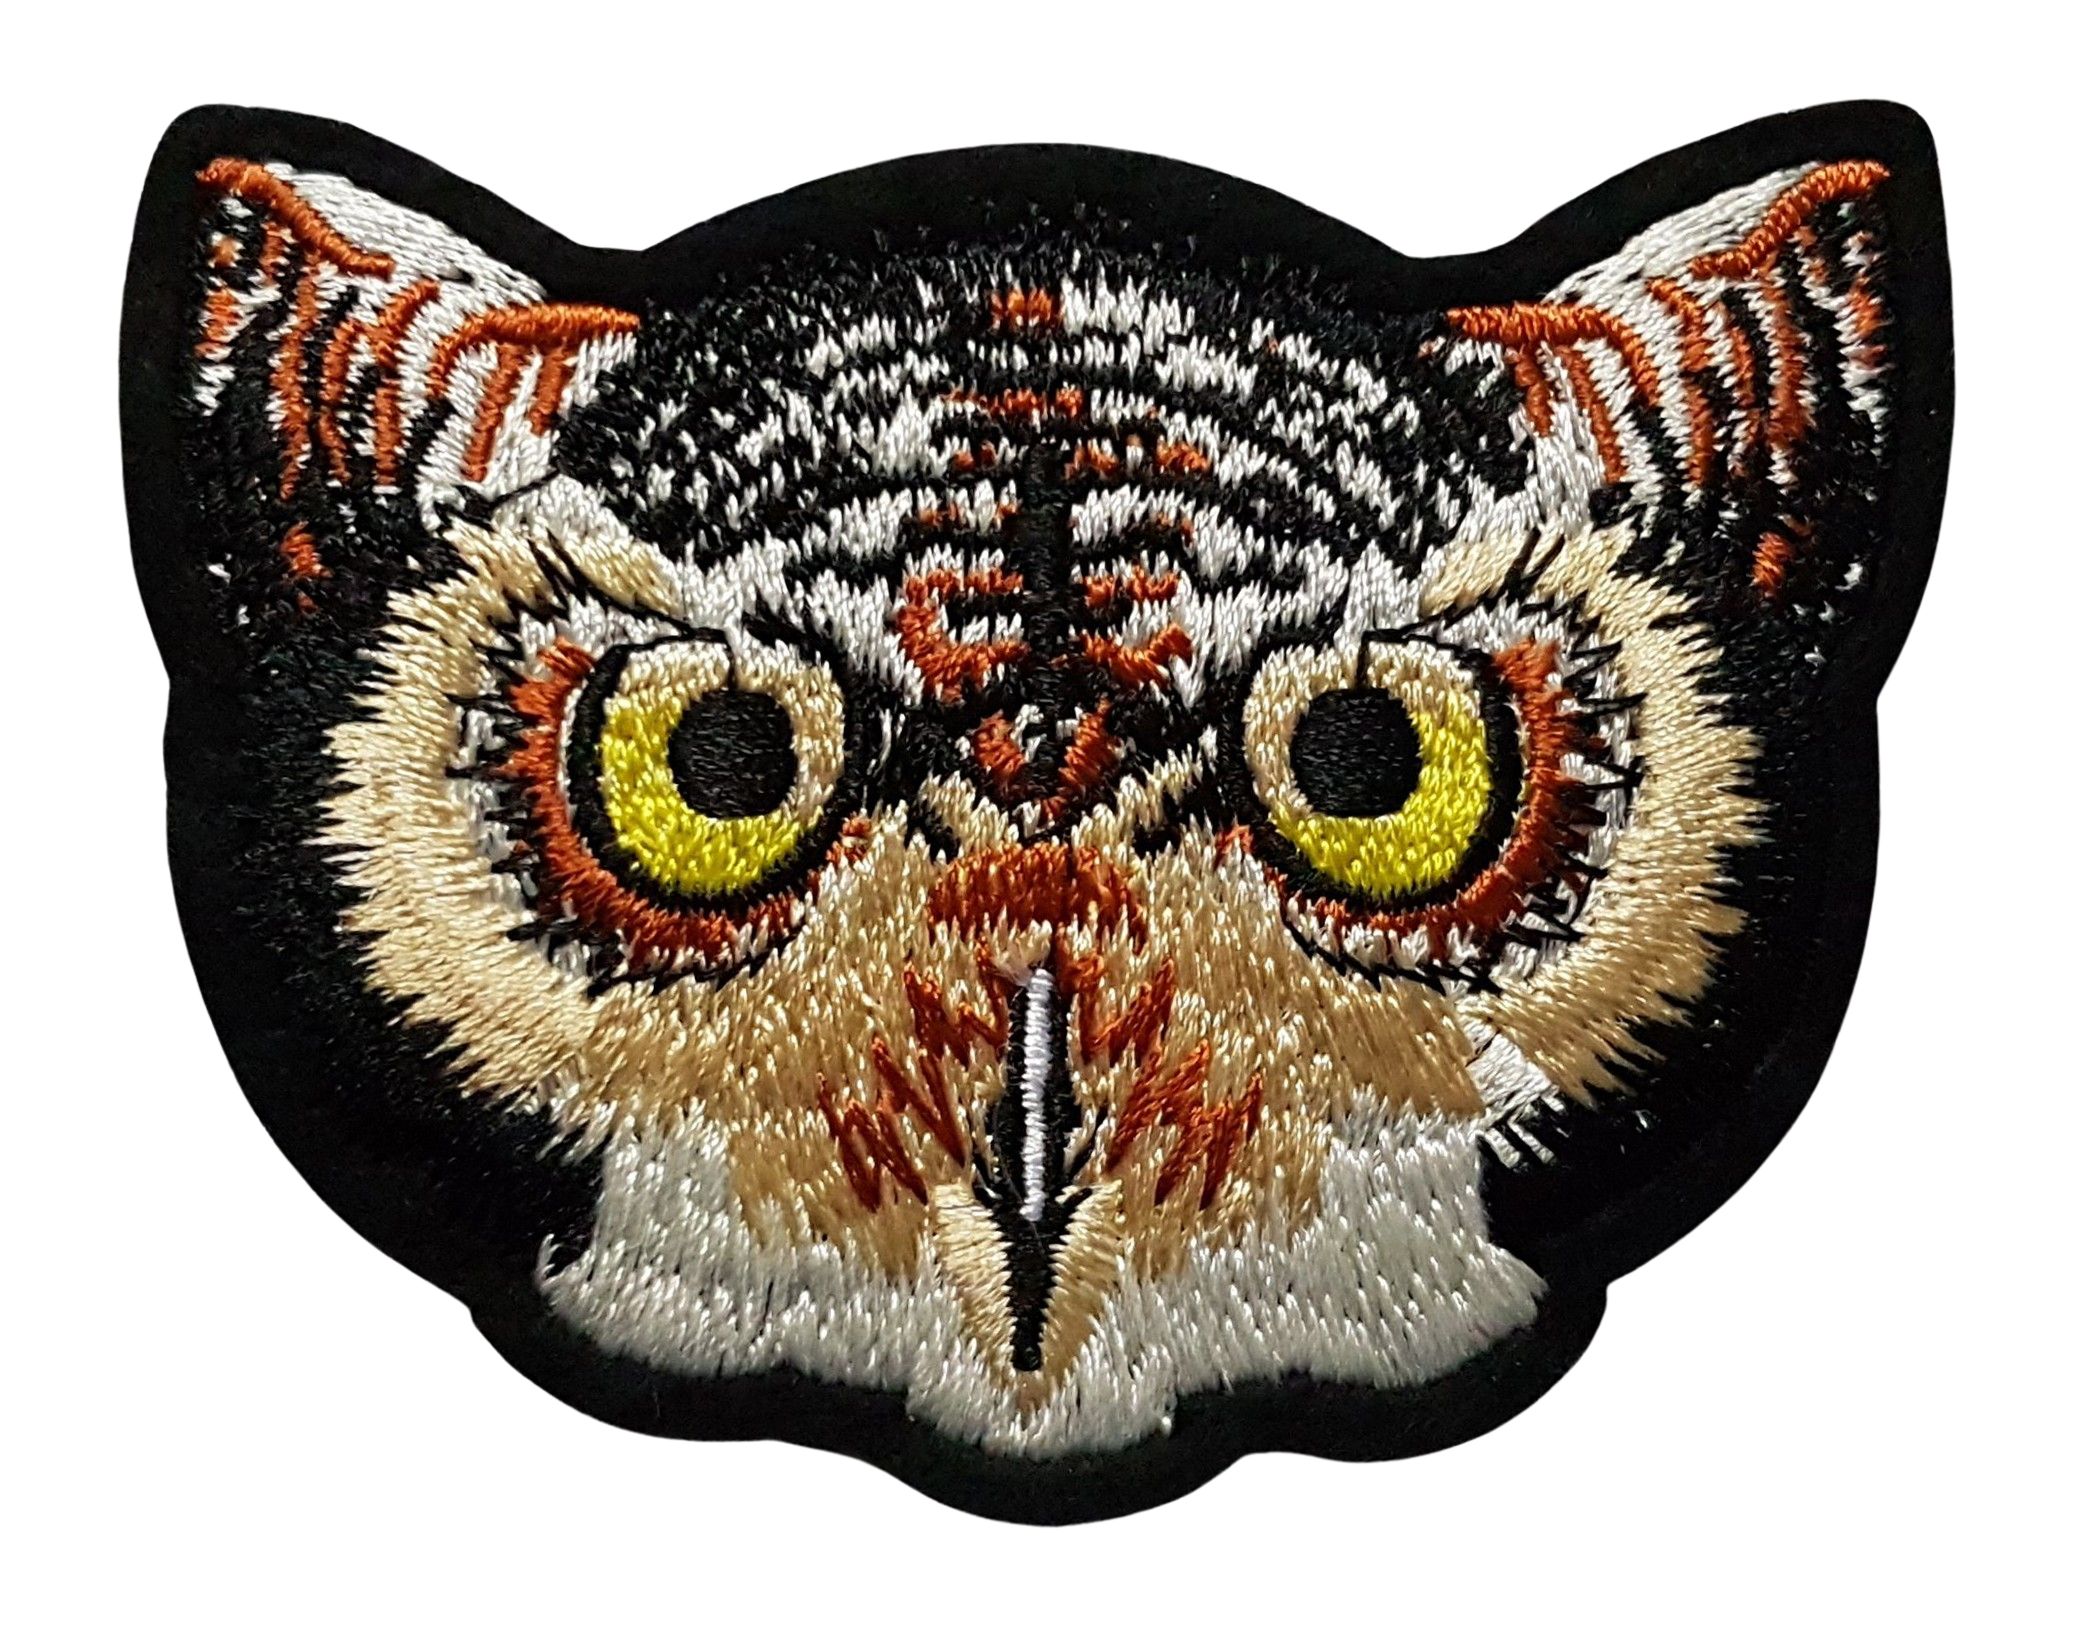 Patch Thermocollant Hibou Grand-Duc 1